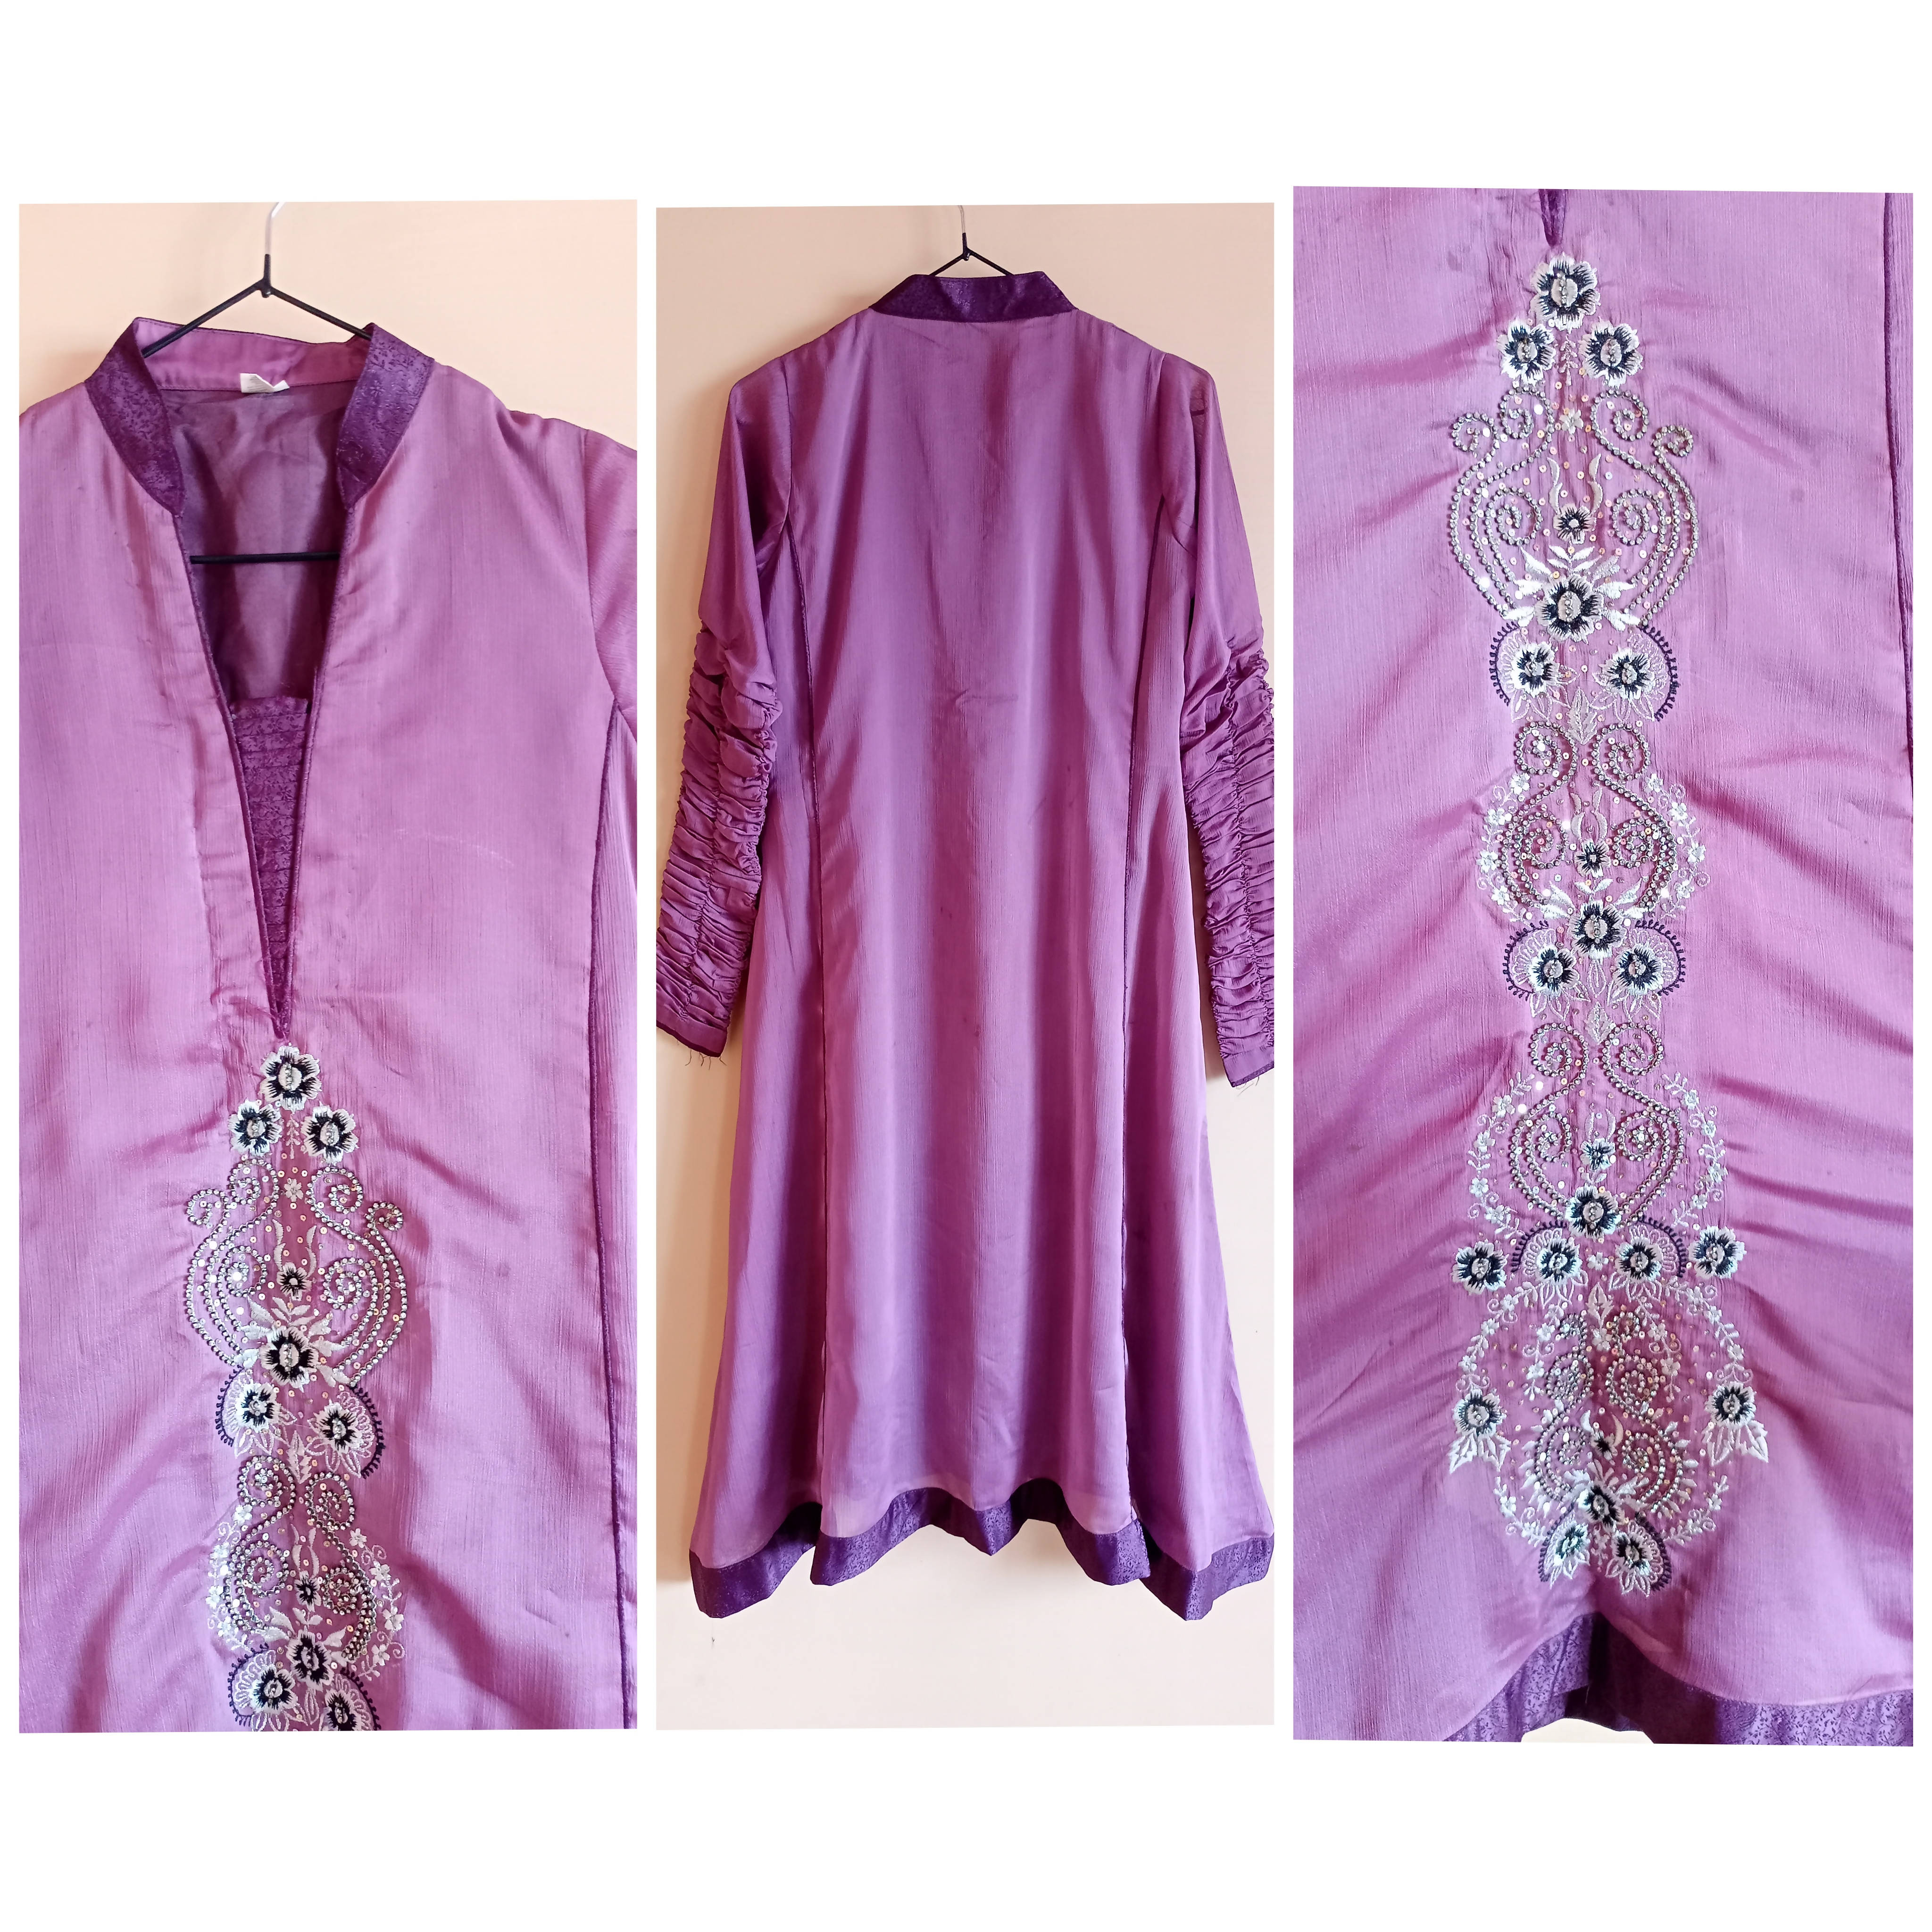 Purple 3 PC Chiffon Suit | Women Locally Made Formals | Small | Preloved